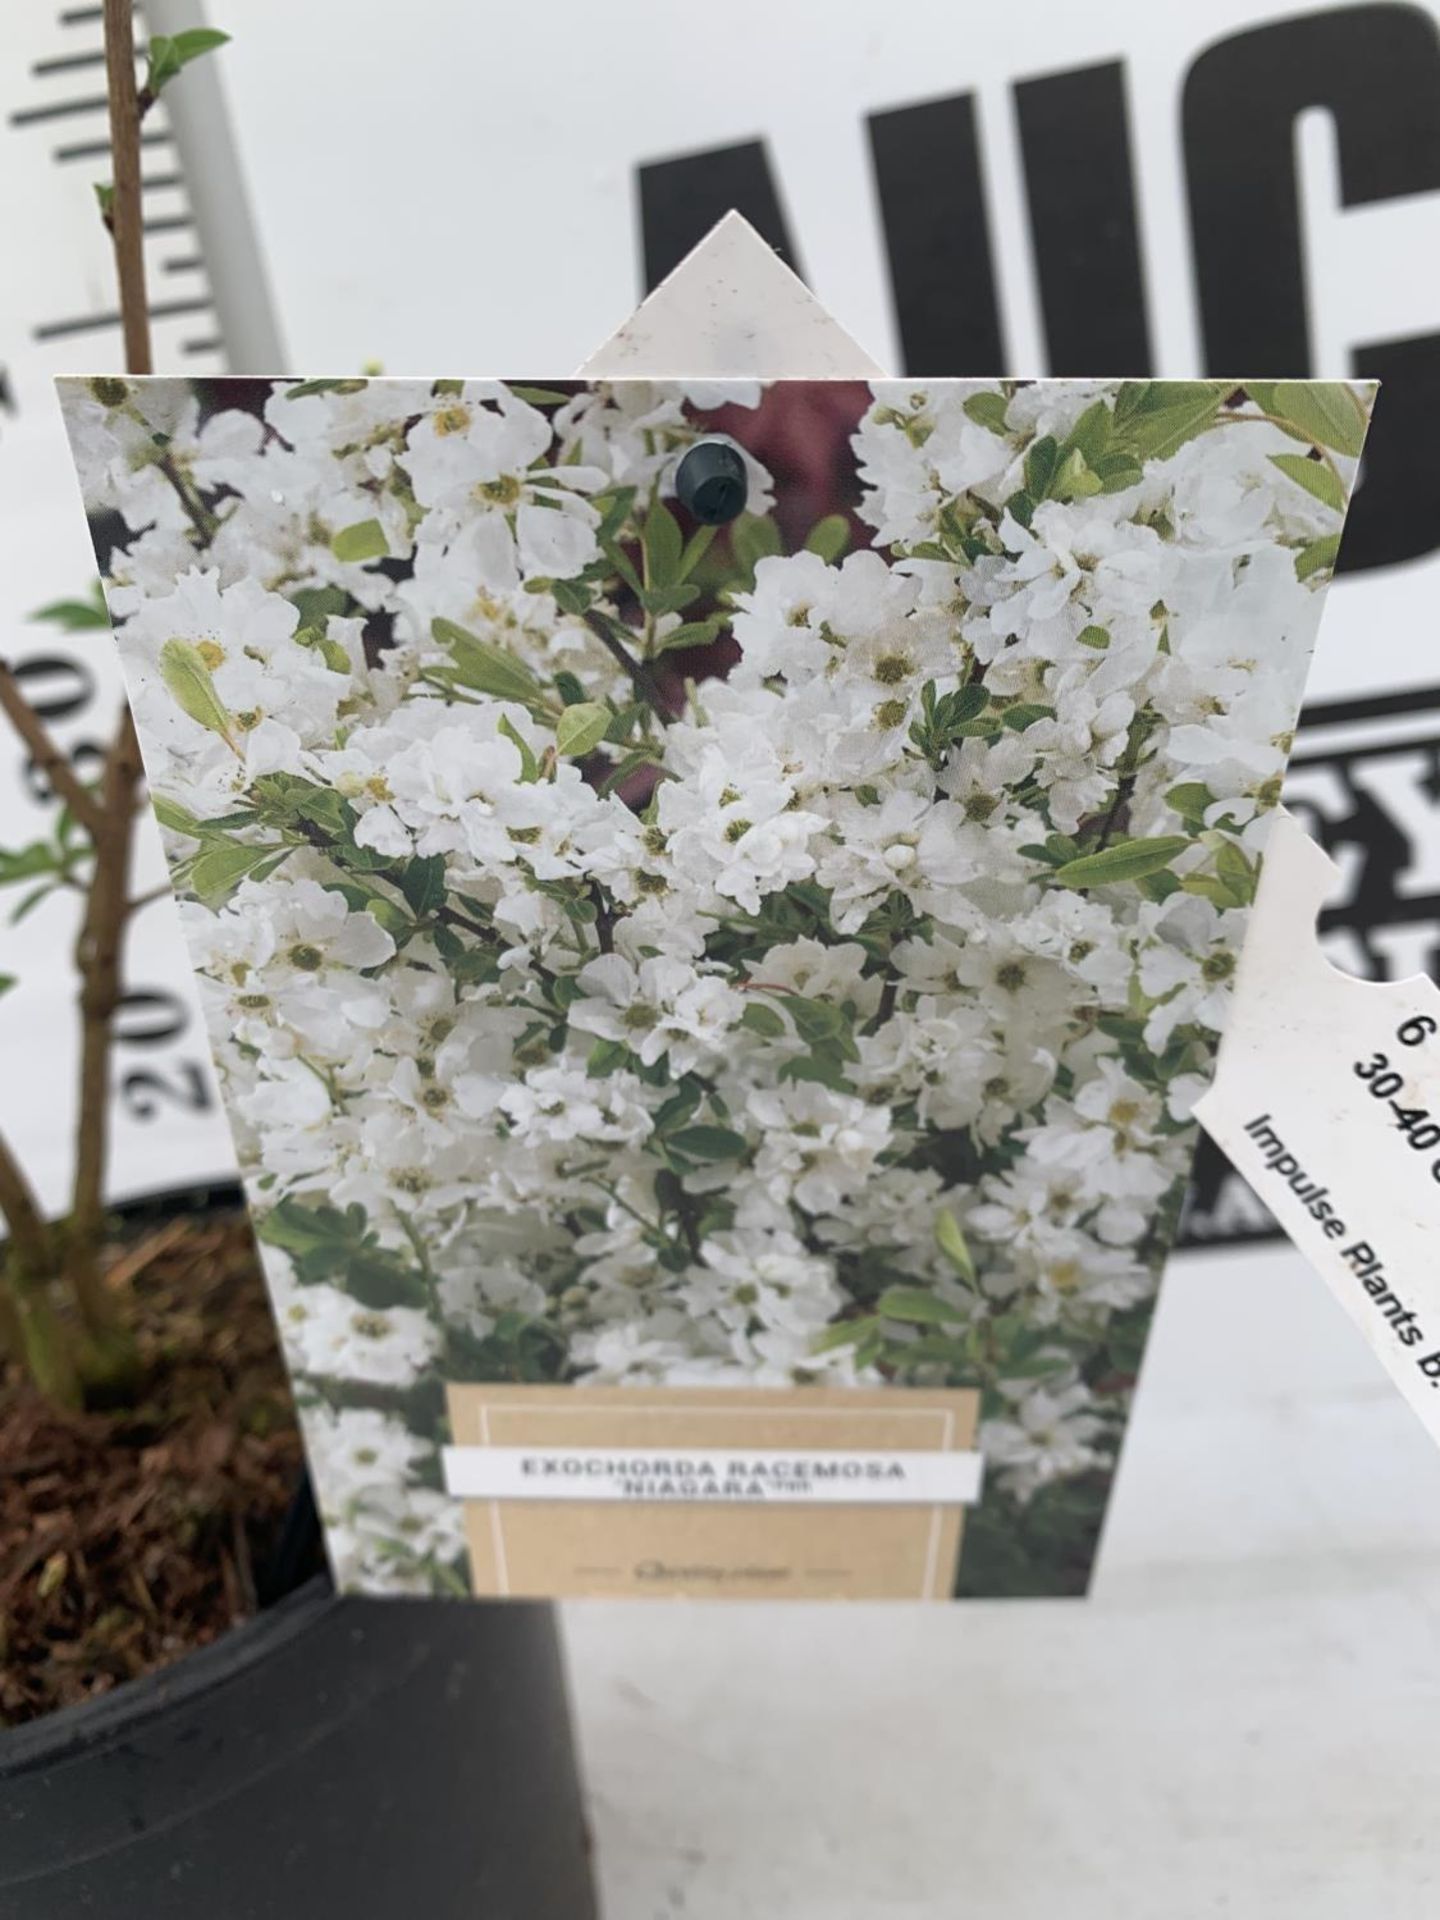 TWO EXOCHORDA RACEMOSA 'NIAGARA' IN 3 LTR POTS APPROX 65CM IN HEIGHT PLUS VAT TO BE SOLD FOR THE TWO - Image 11 of 12